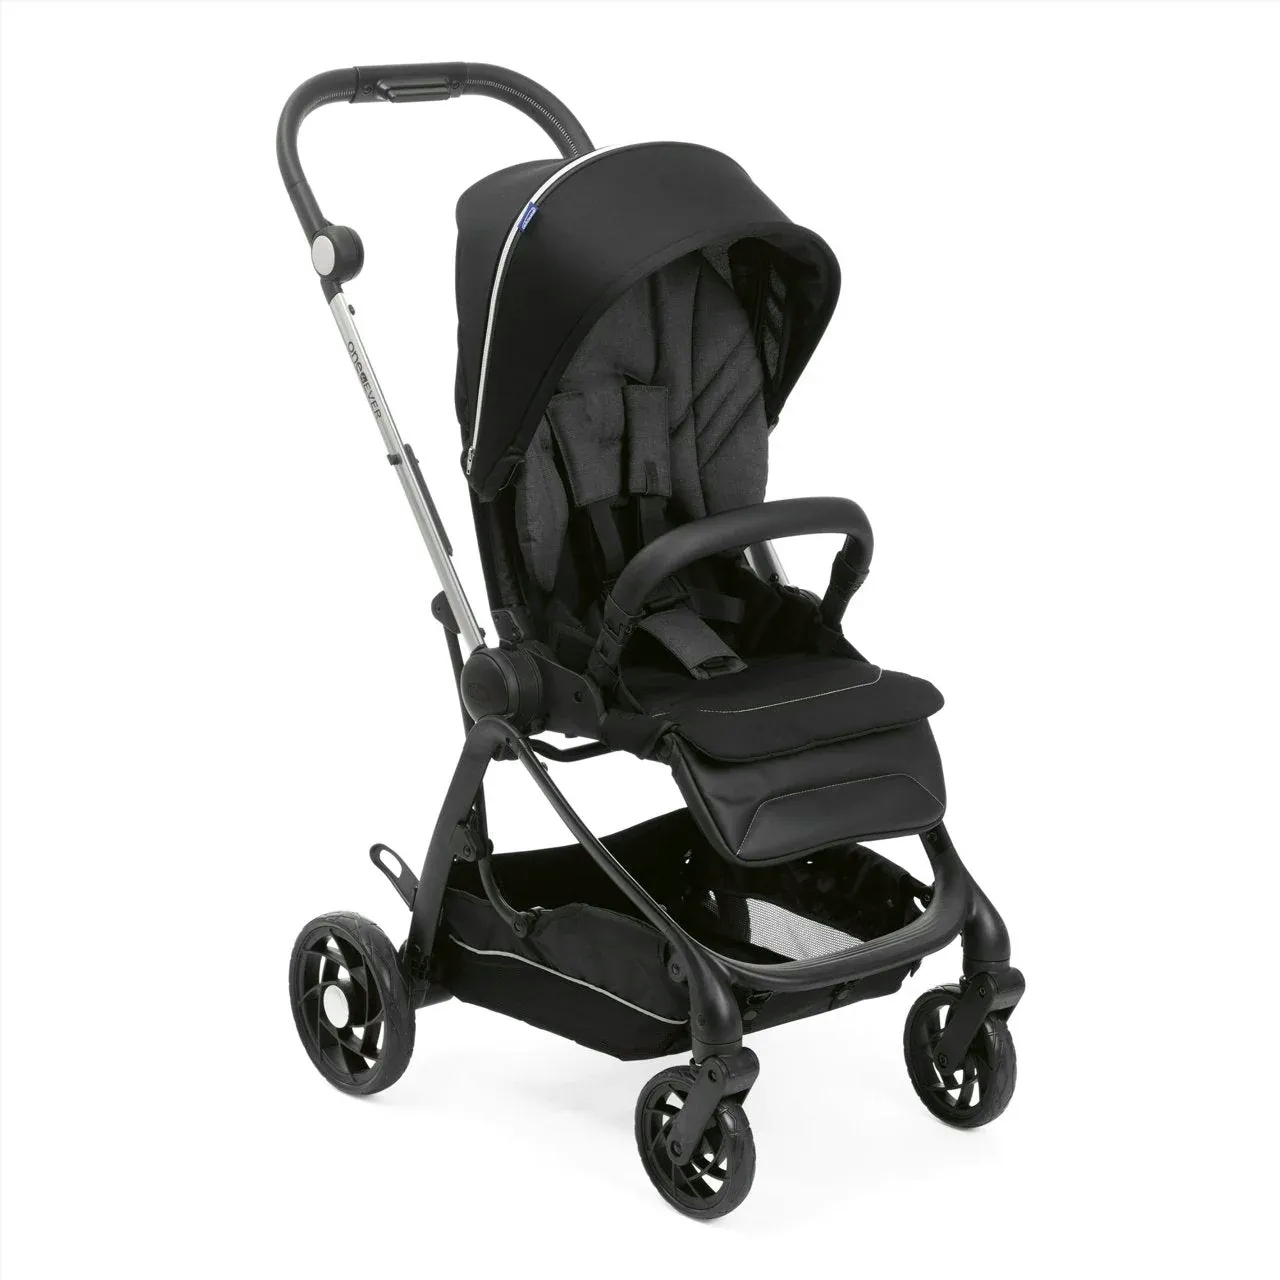 CHICCO Καρότσι 3 Σε 1 One4Ever Light Pirate Black